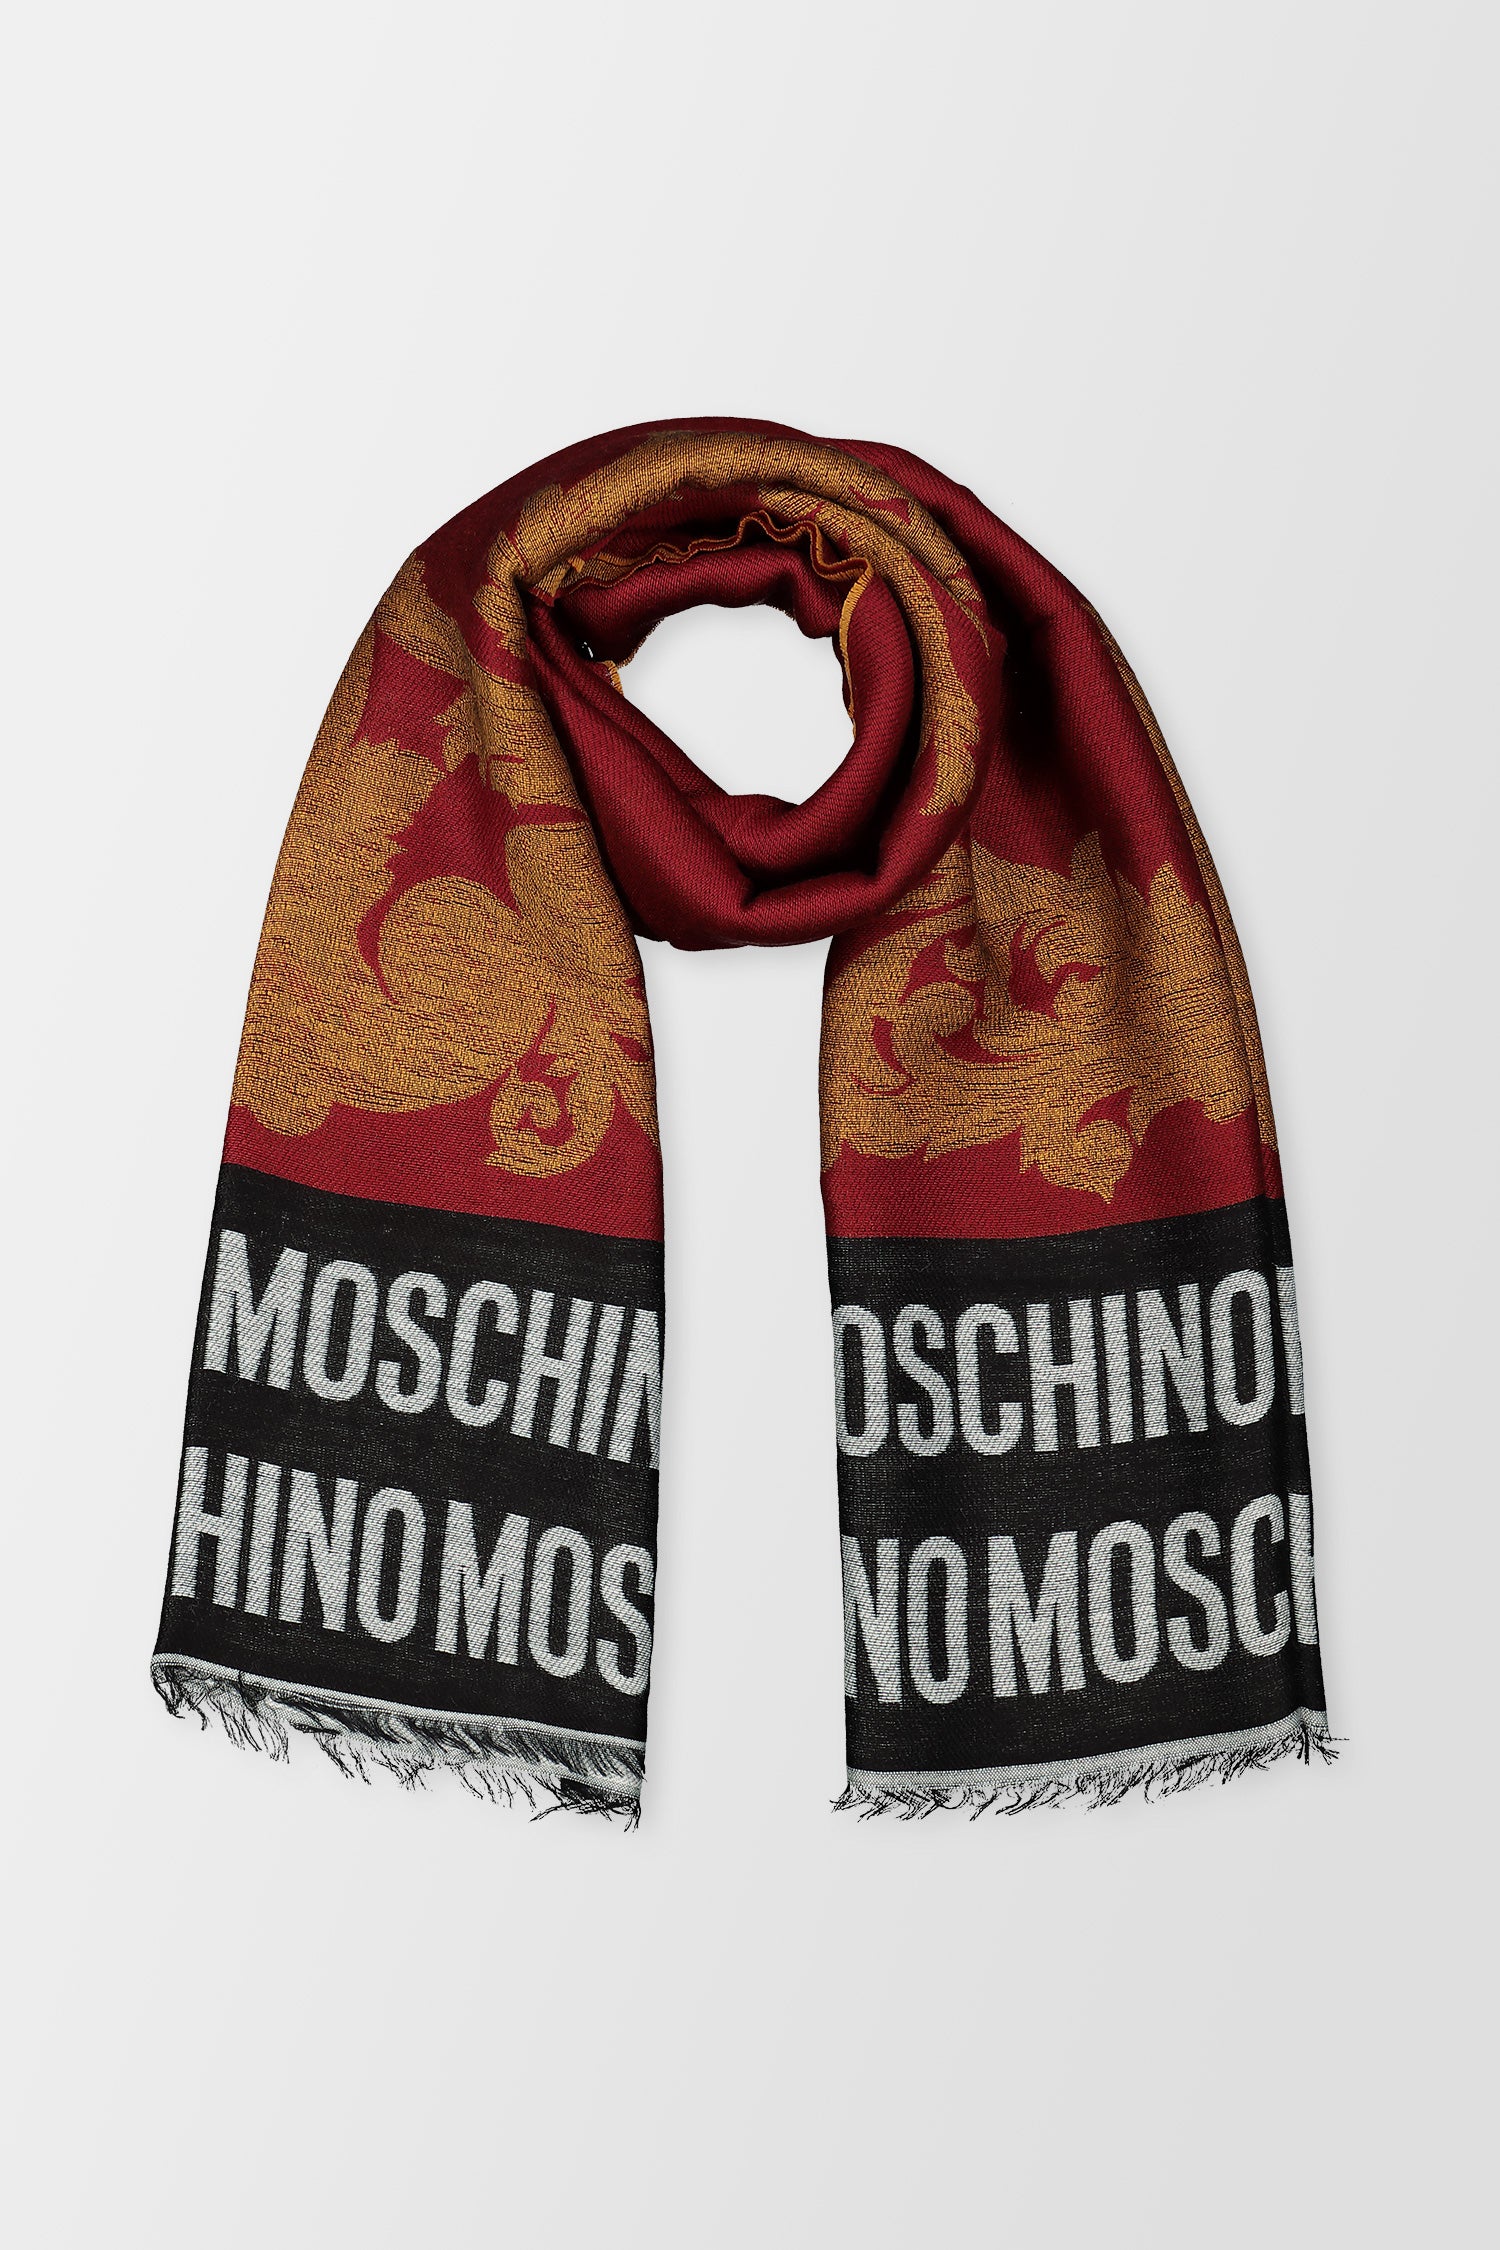 Moschino Red Scarf